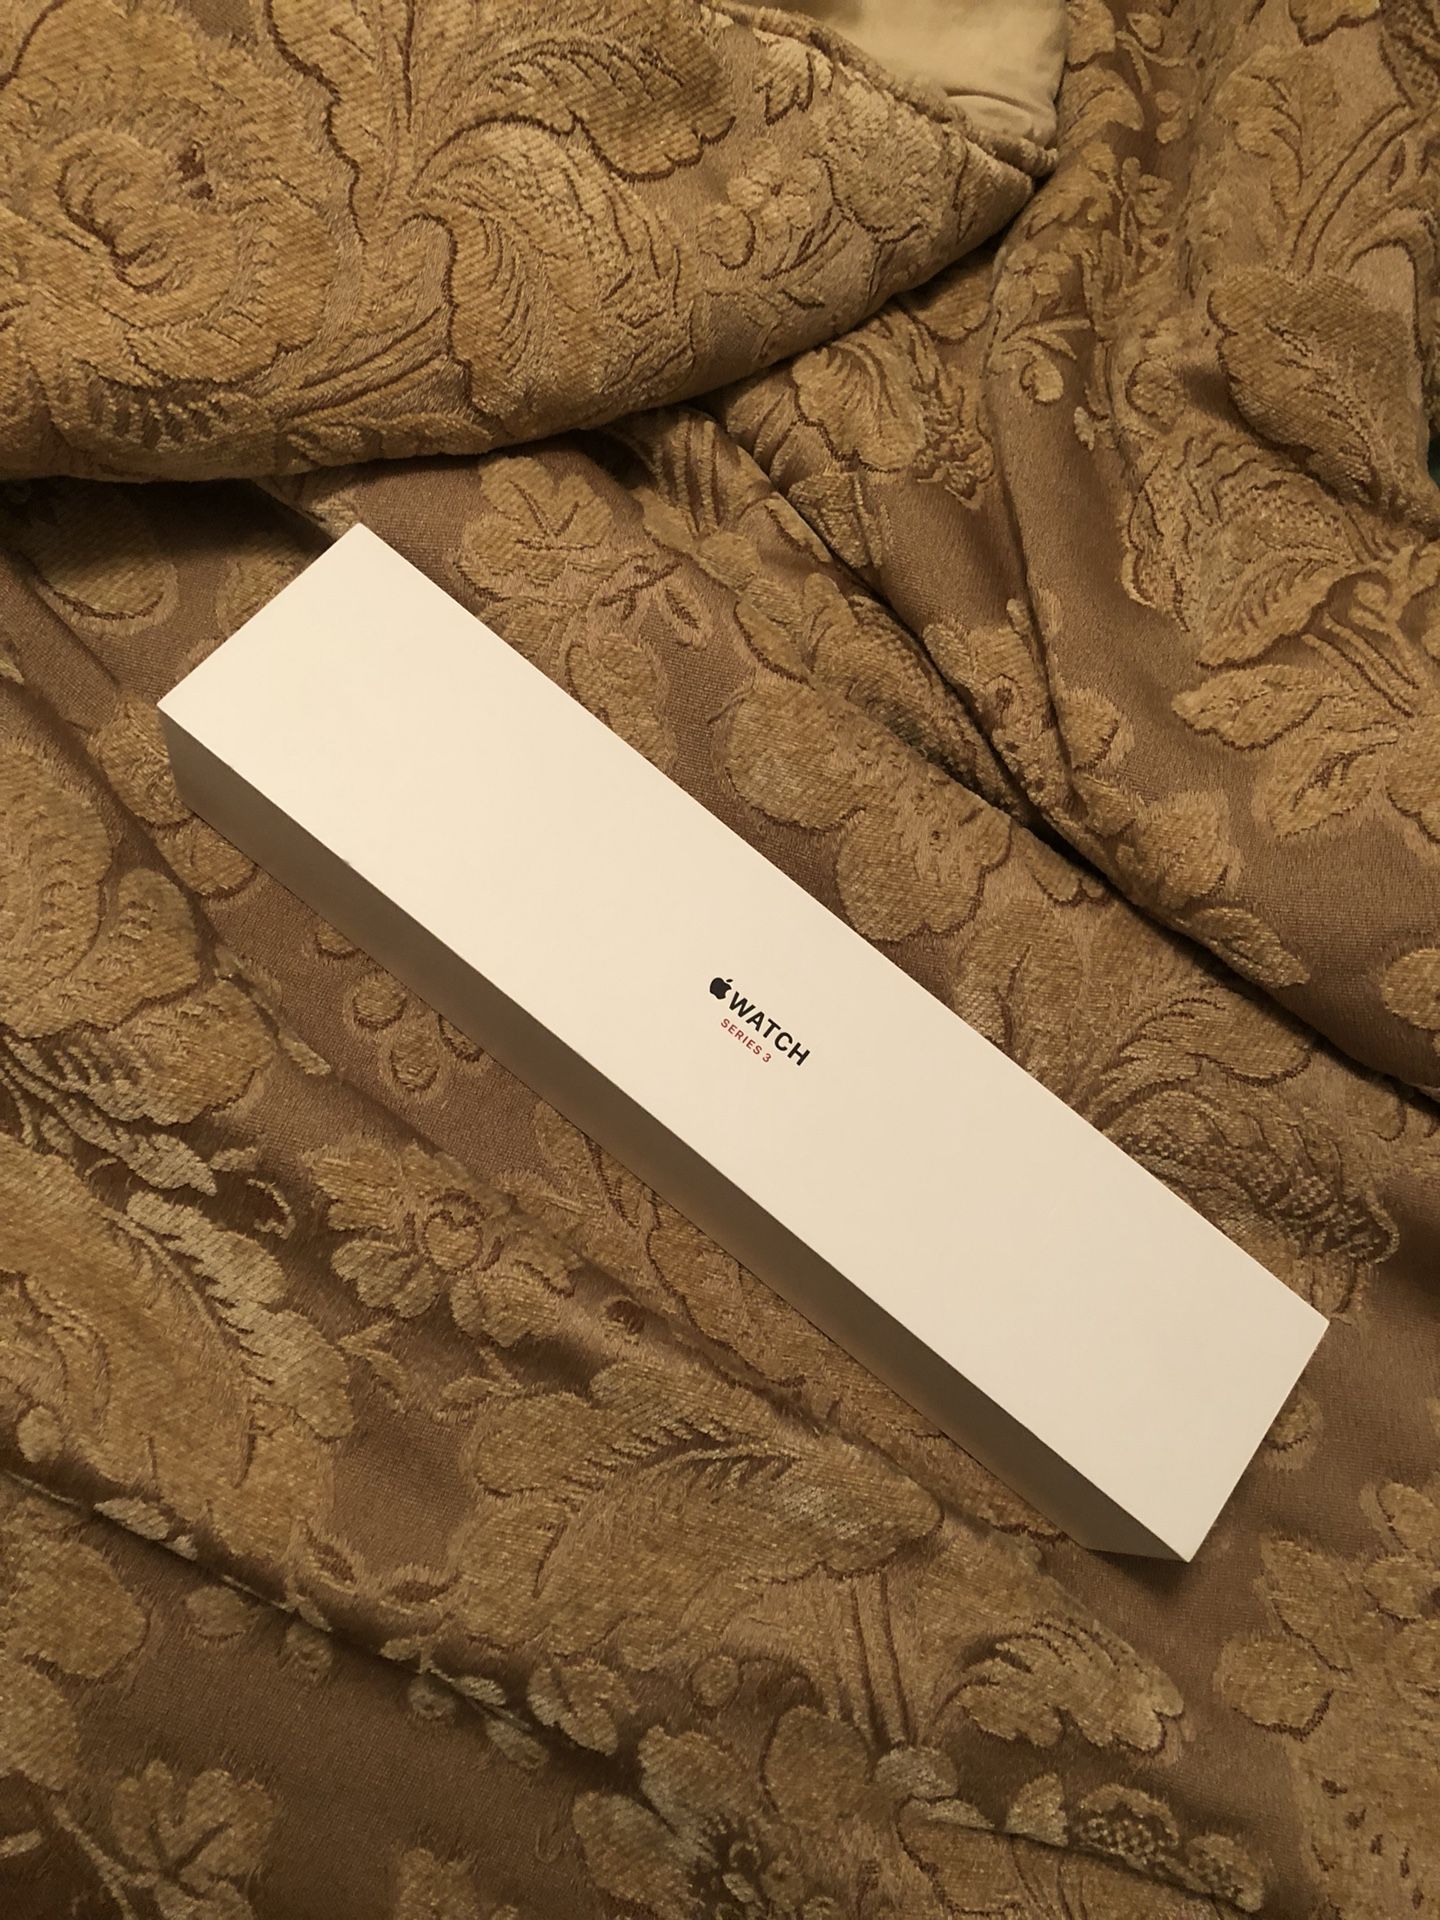 Apple watch series 3 BOX ONLY